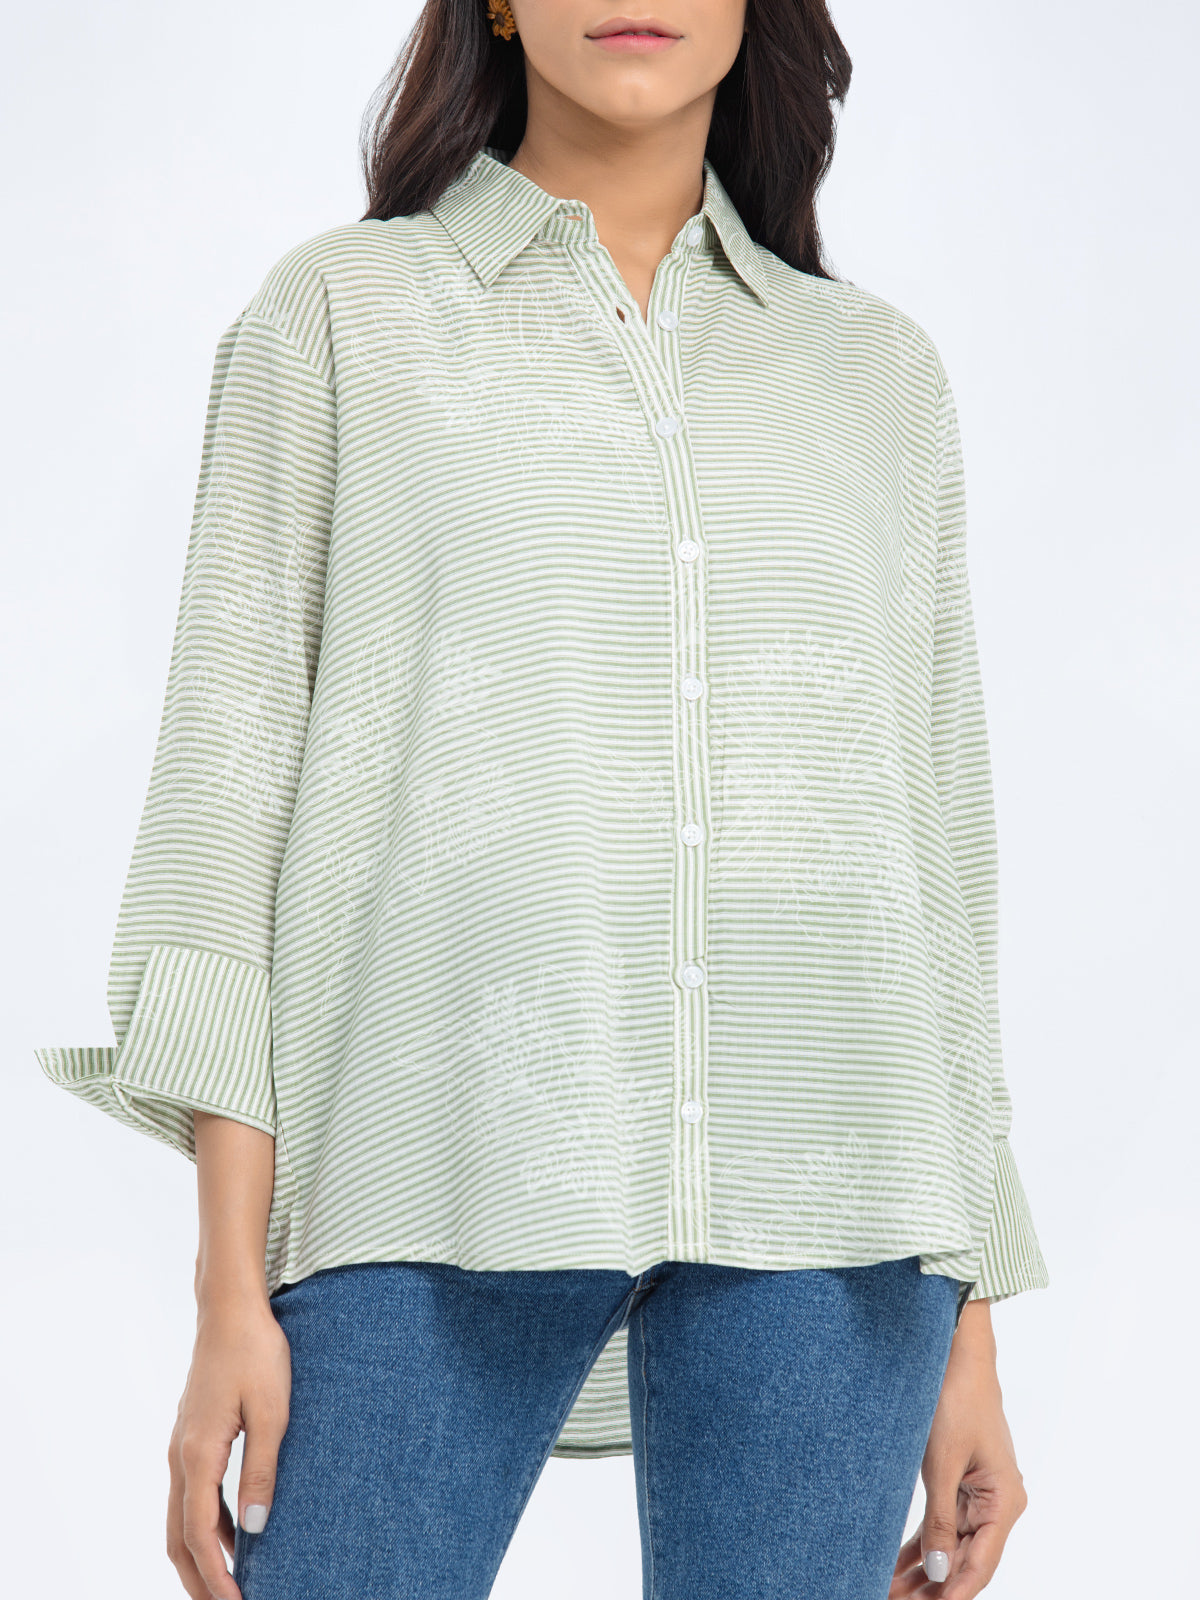 Relaxed Fit Yarn Dyed Shirt - FWTS24-041